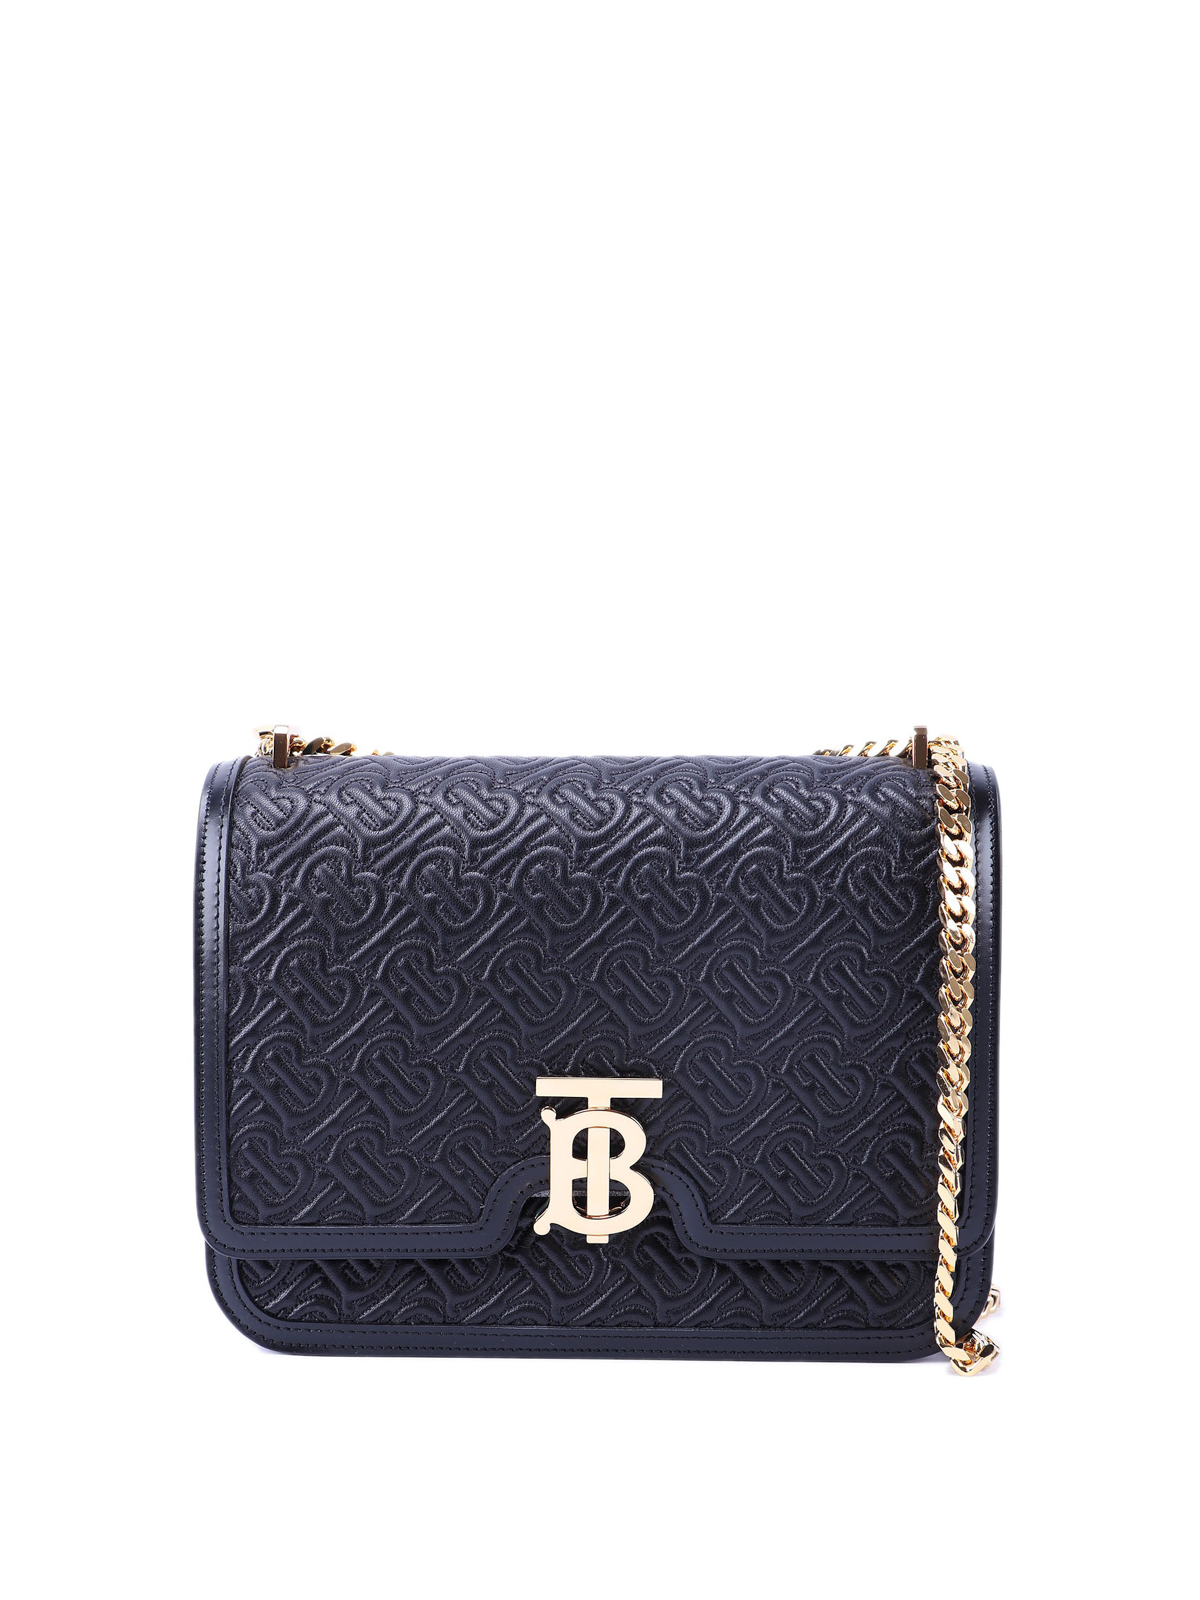 BURBERRY TB QUILTED LEATHER MEDIUM BAG